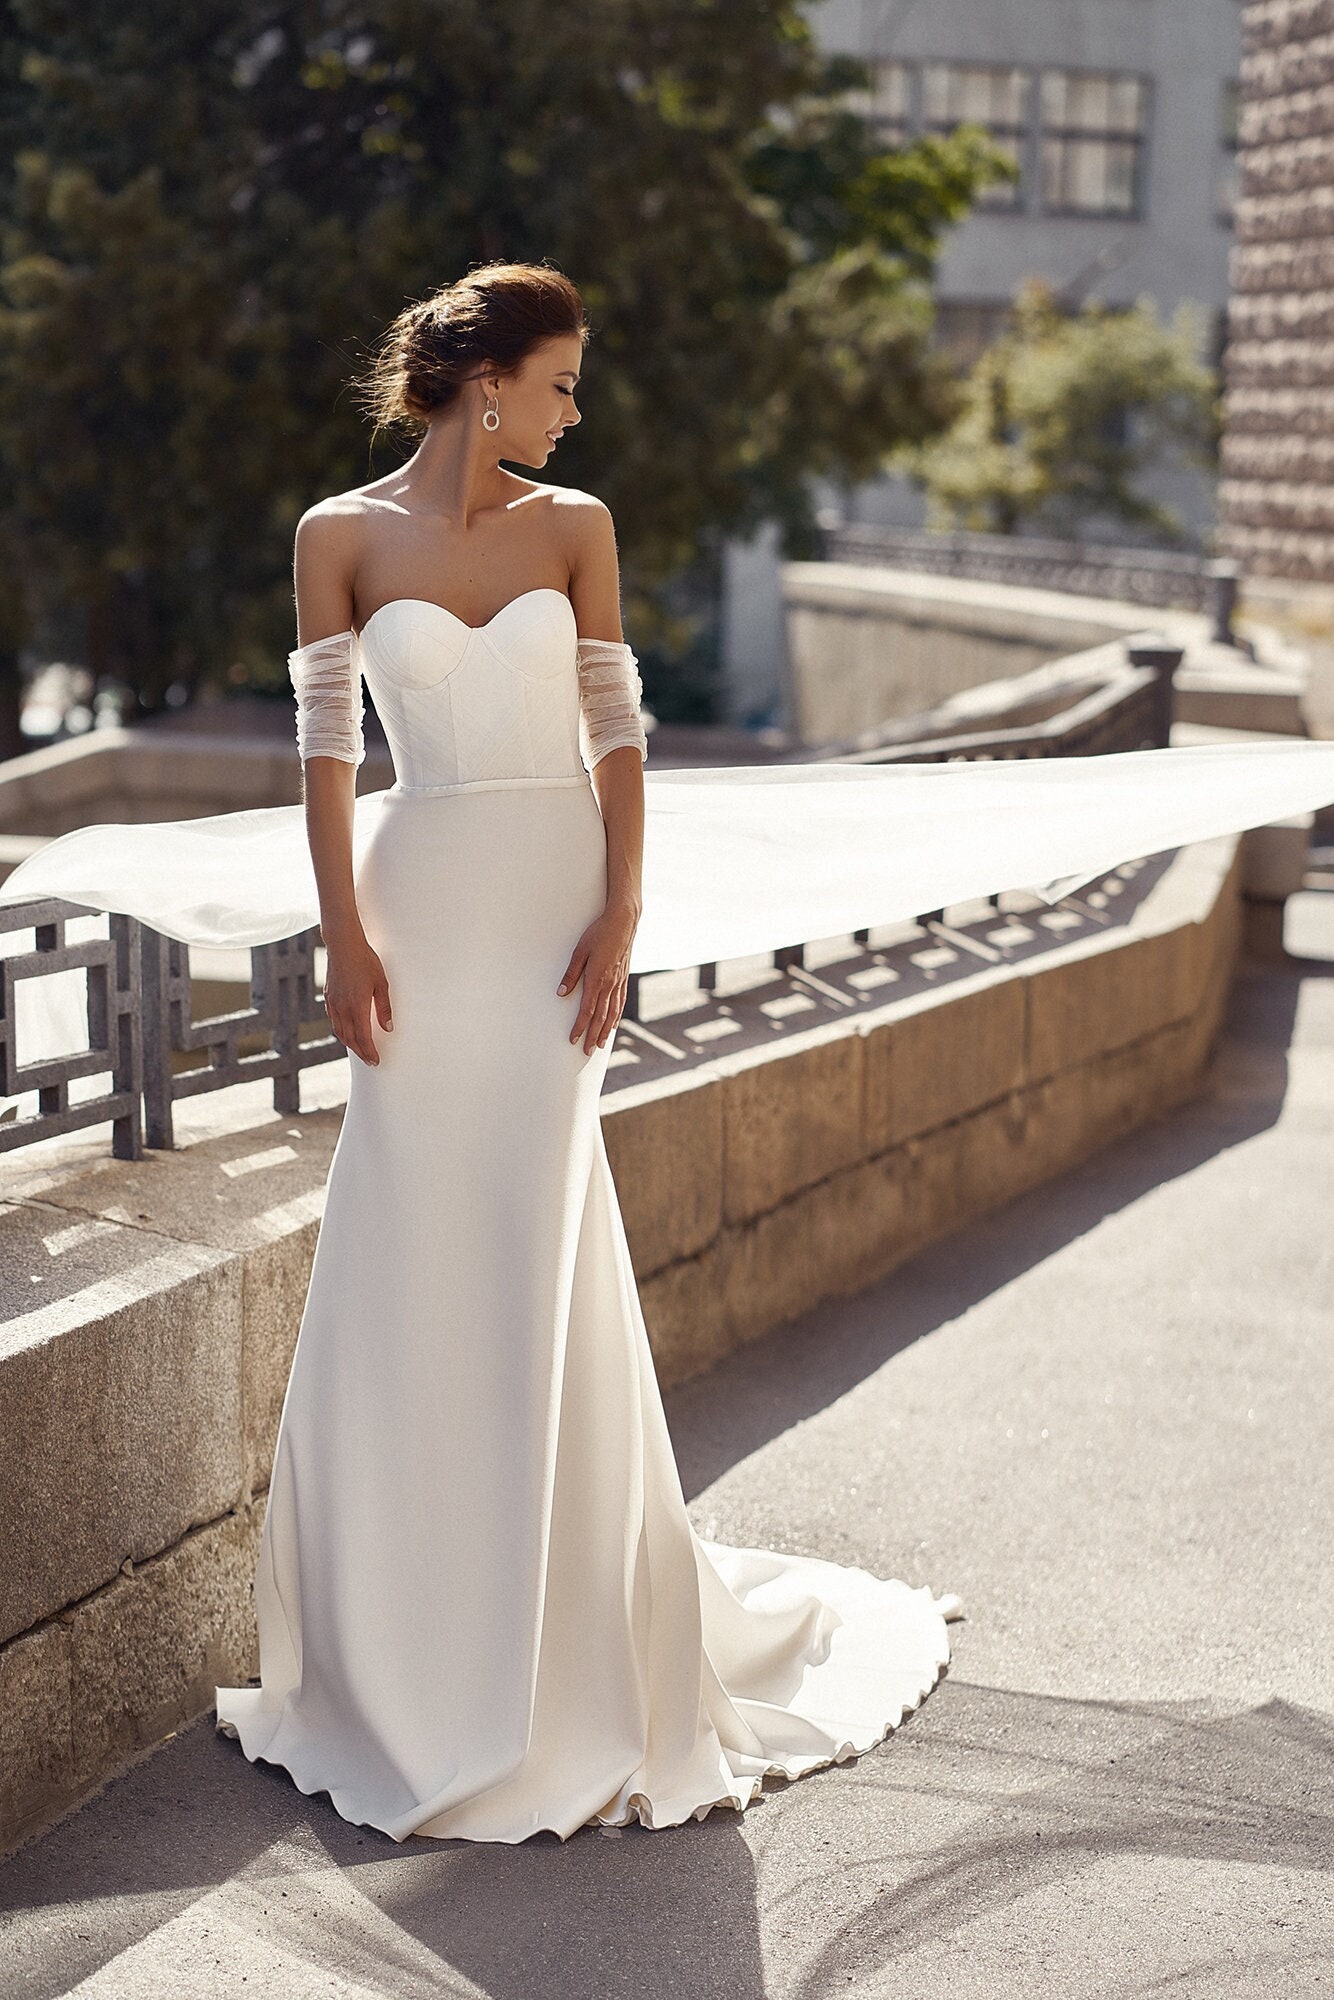 Pearl Wedding Dresses: 23 Pretty Pearl Dresses & Accessories - hitched.co.uk